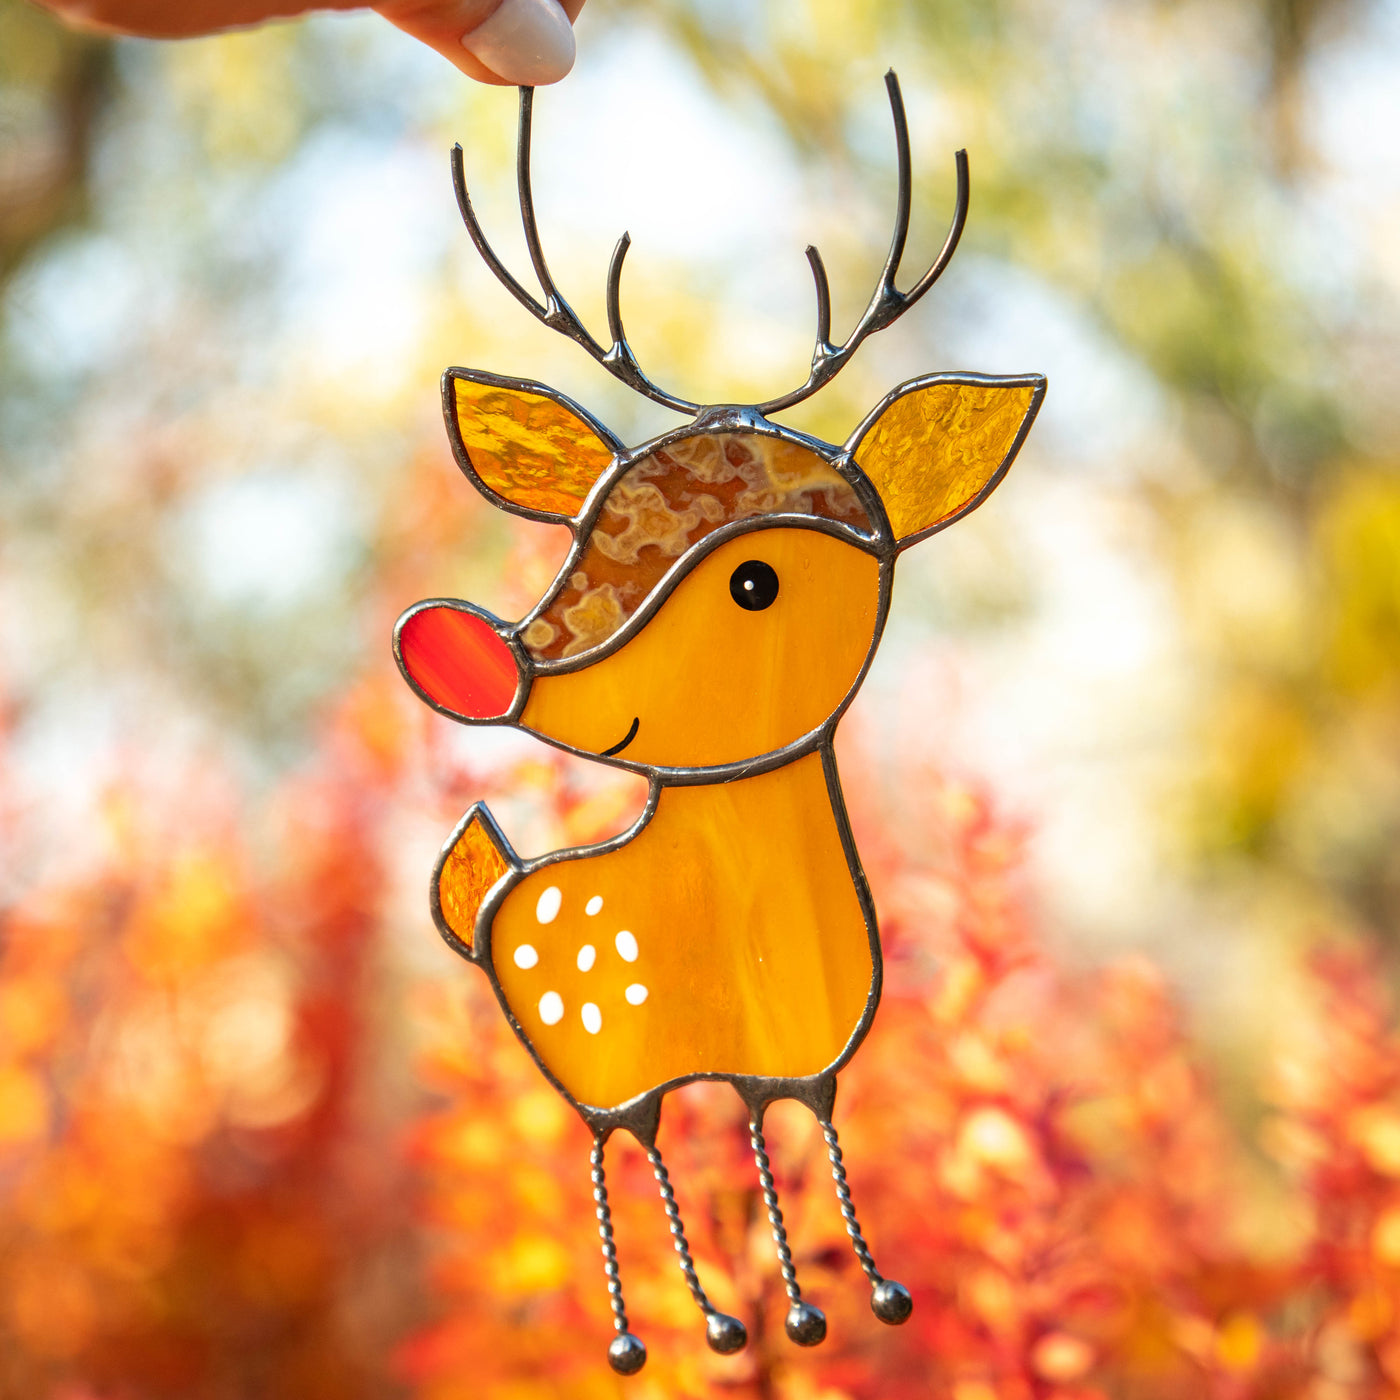 Stained glass reindeer with the red nose suncatcher for Christmas decor